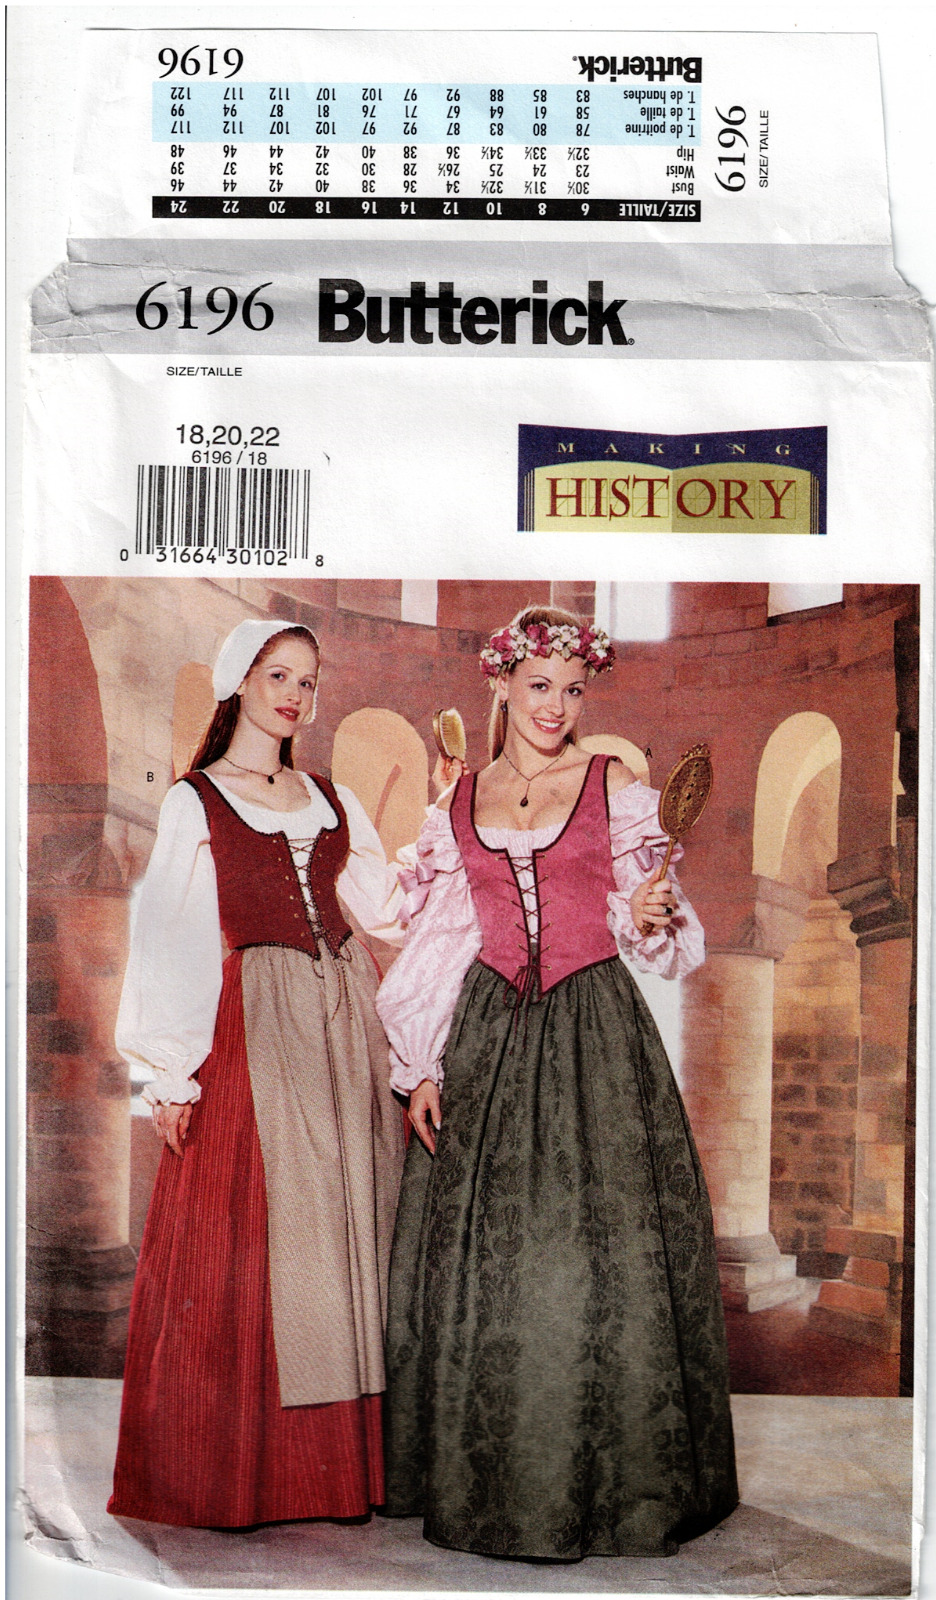 6196 Butterick Medieval Historical  Costume Dress uncut sewing Pattern  18 20 22